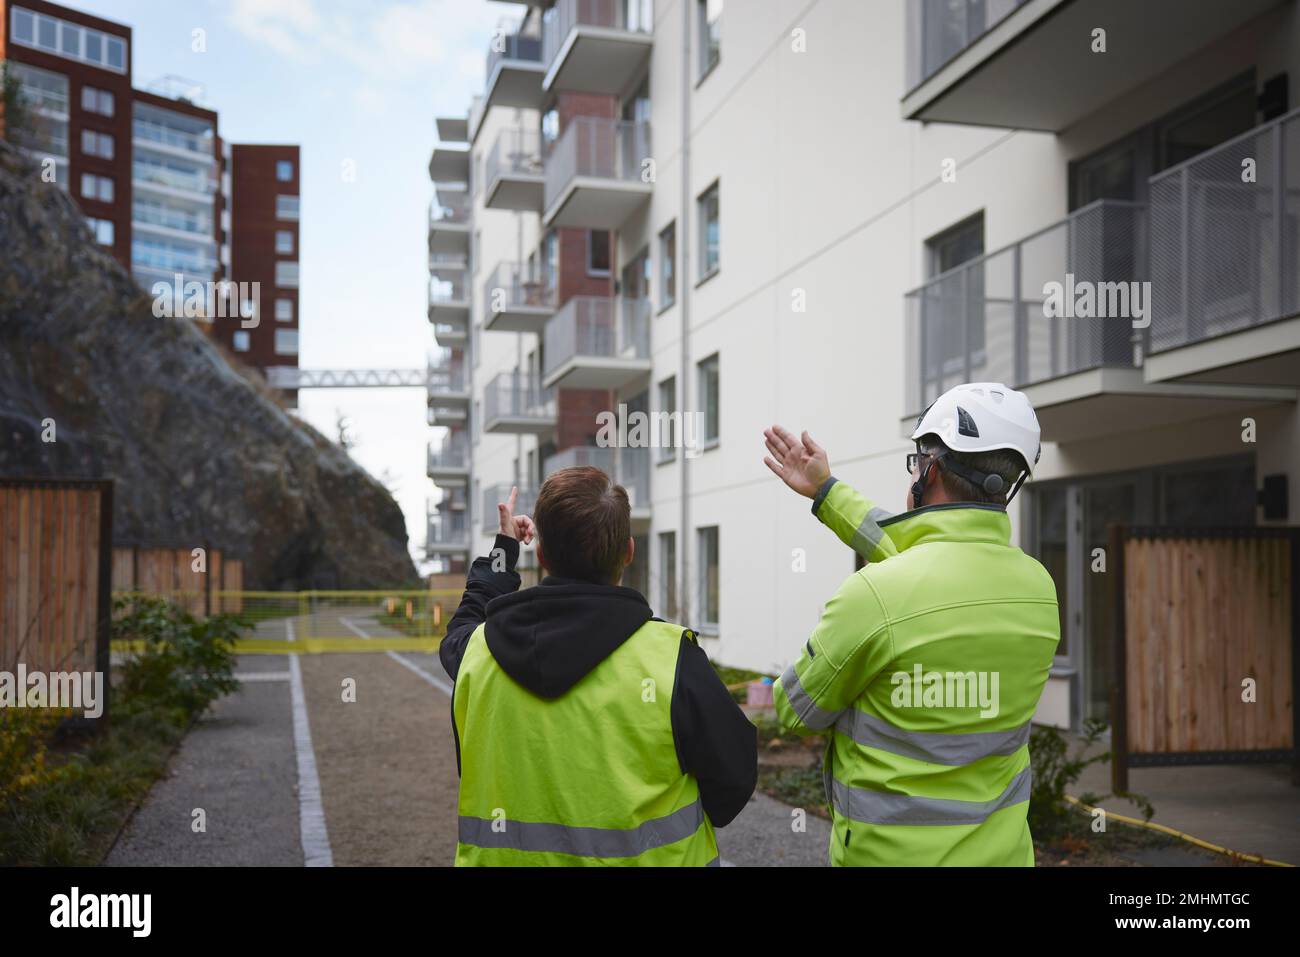 Constructions workers in residential area Stock Photo